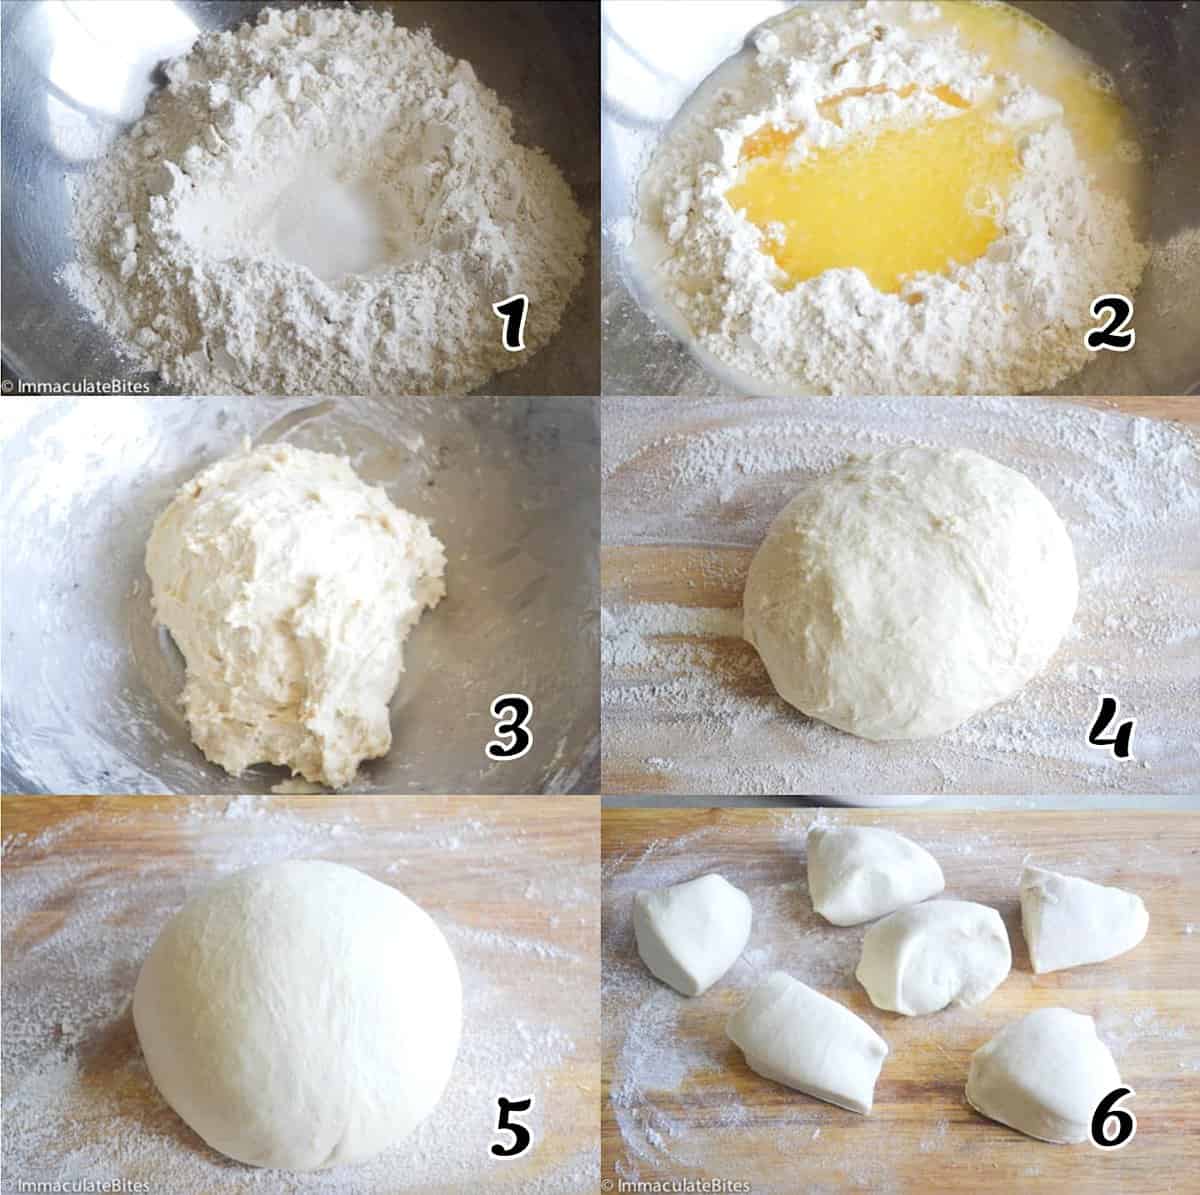 Mix all the ingredients to make the dough